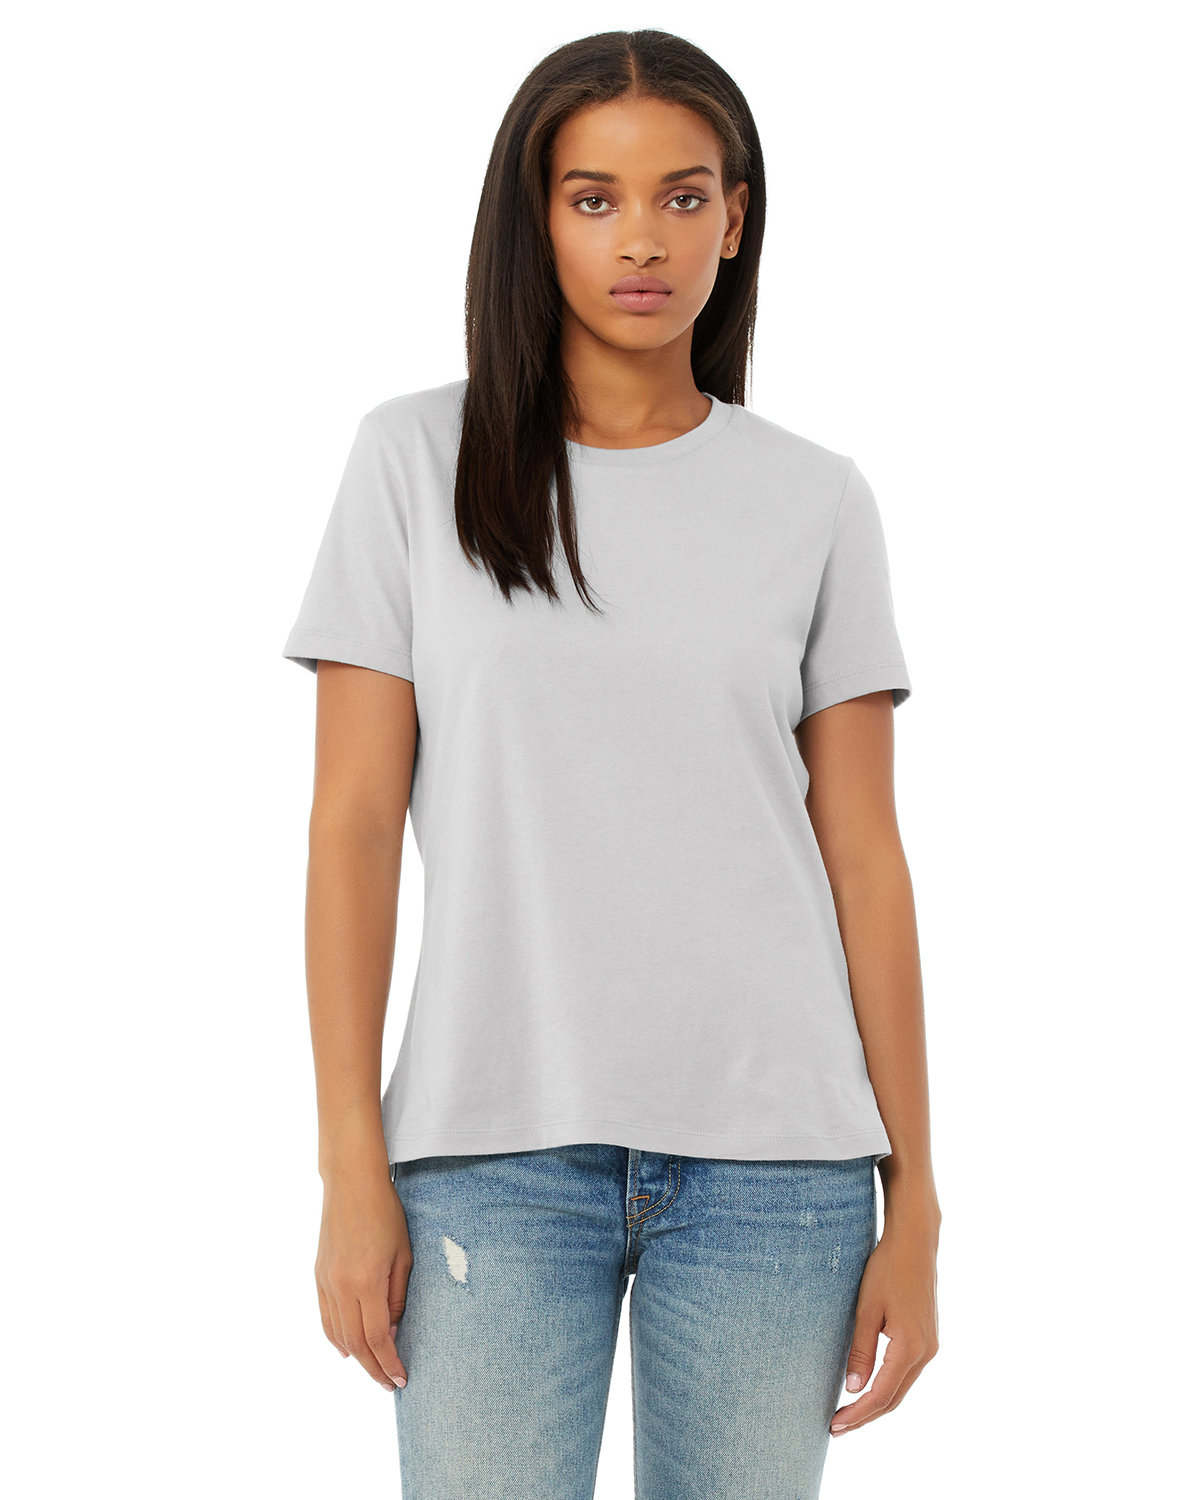 Bella + Canvas Ladies' Relaxed Jersey Short-Sleeve T-Shirt SOLID ATHLTC GRY 